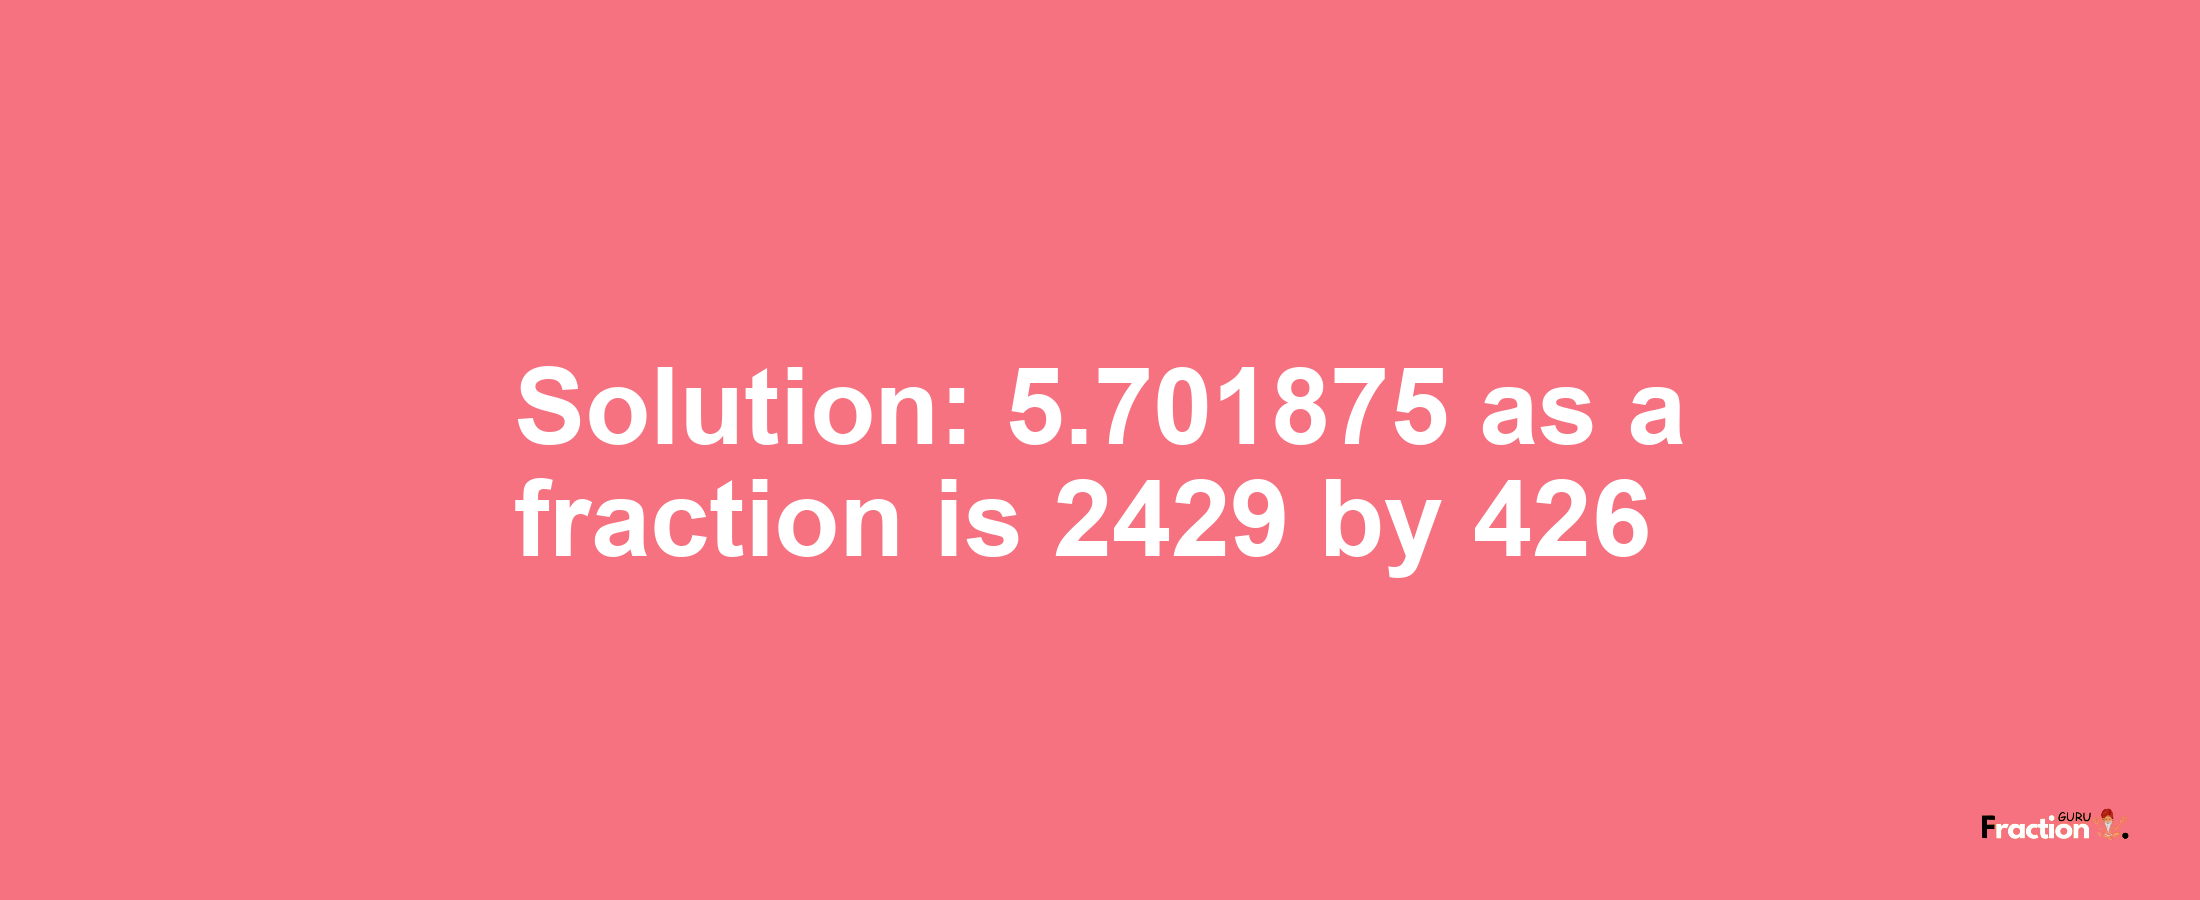 Solution:5.701875 as a fraction is 2429/426